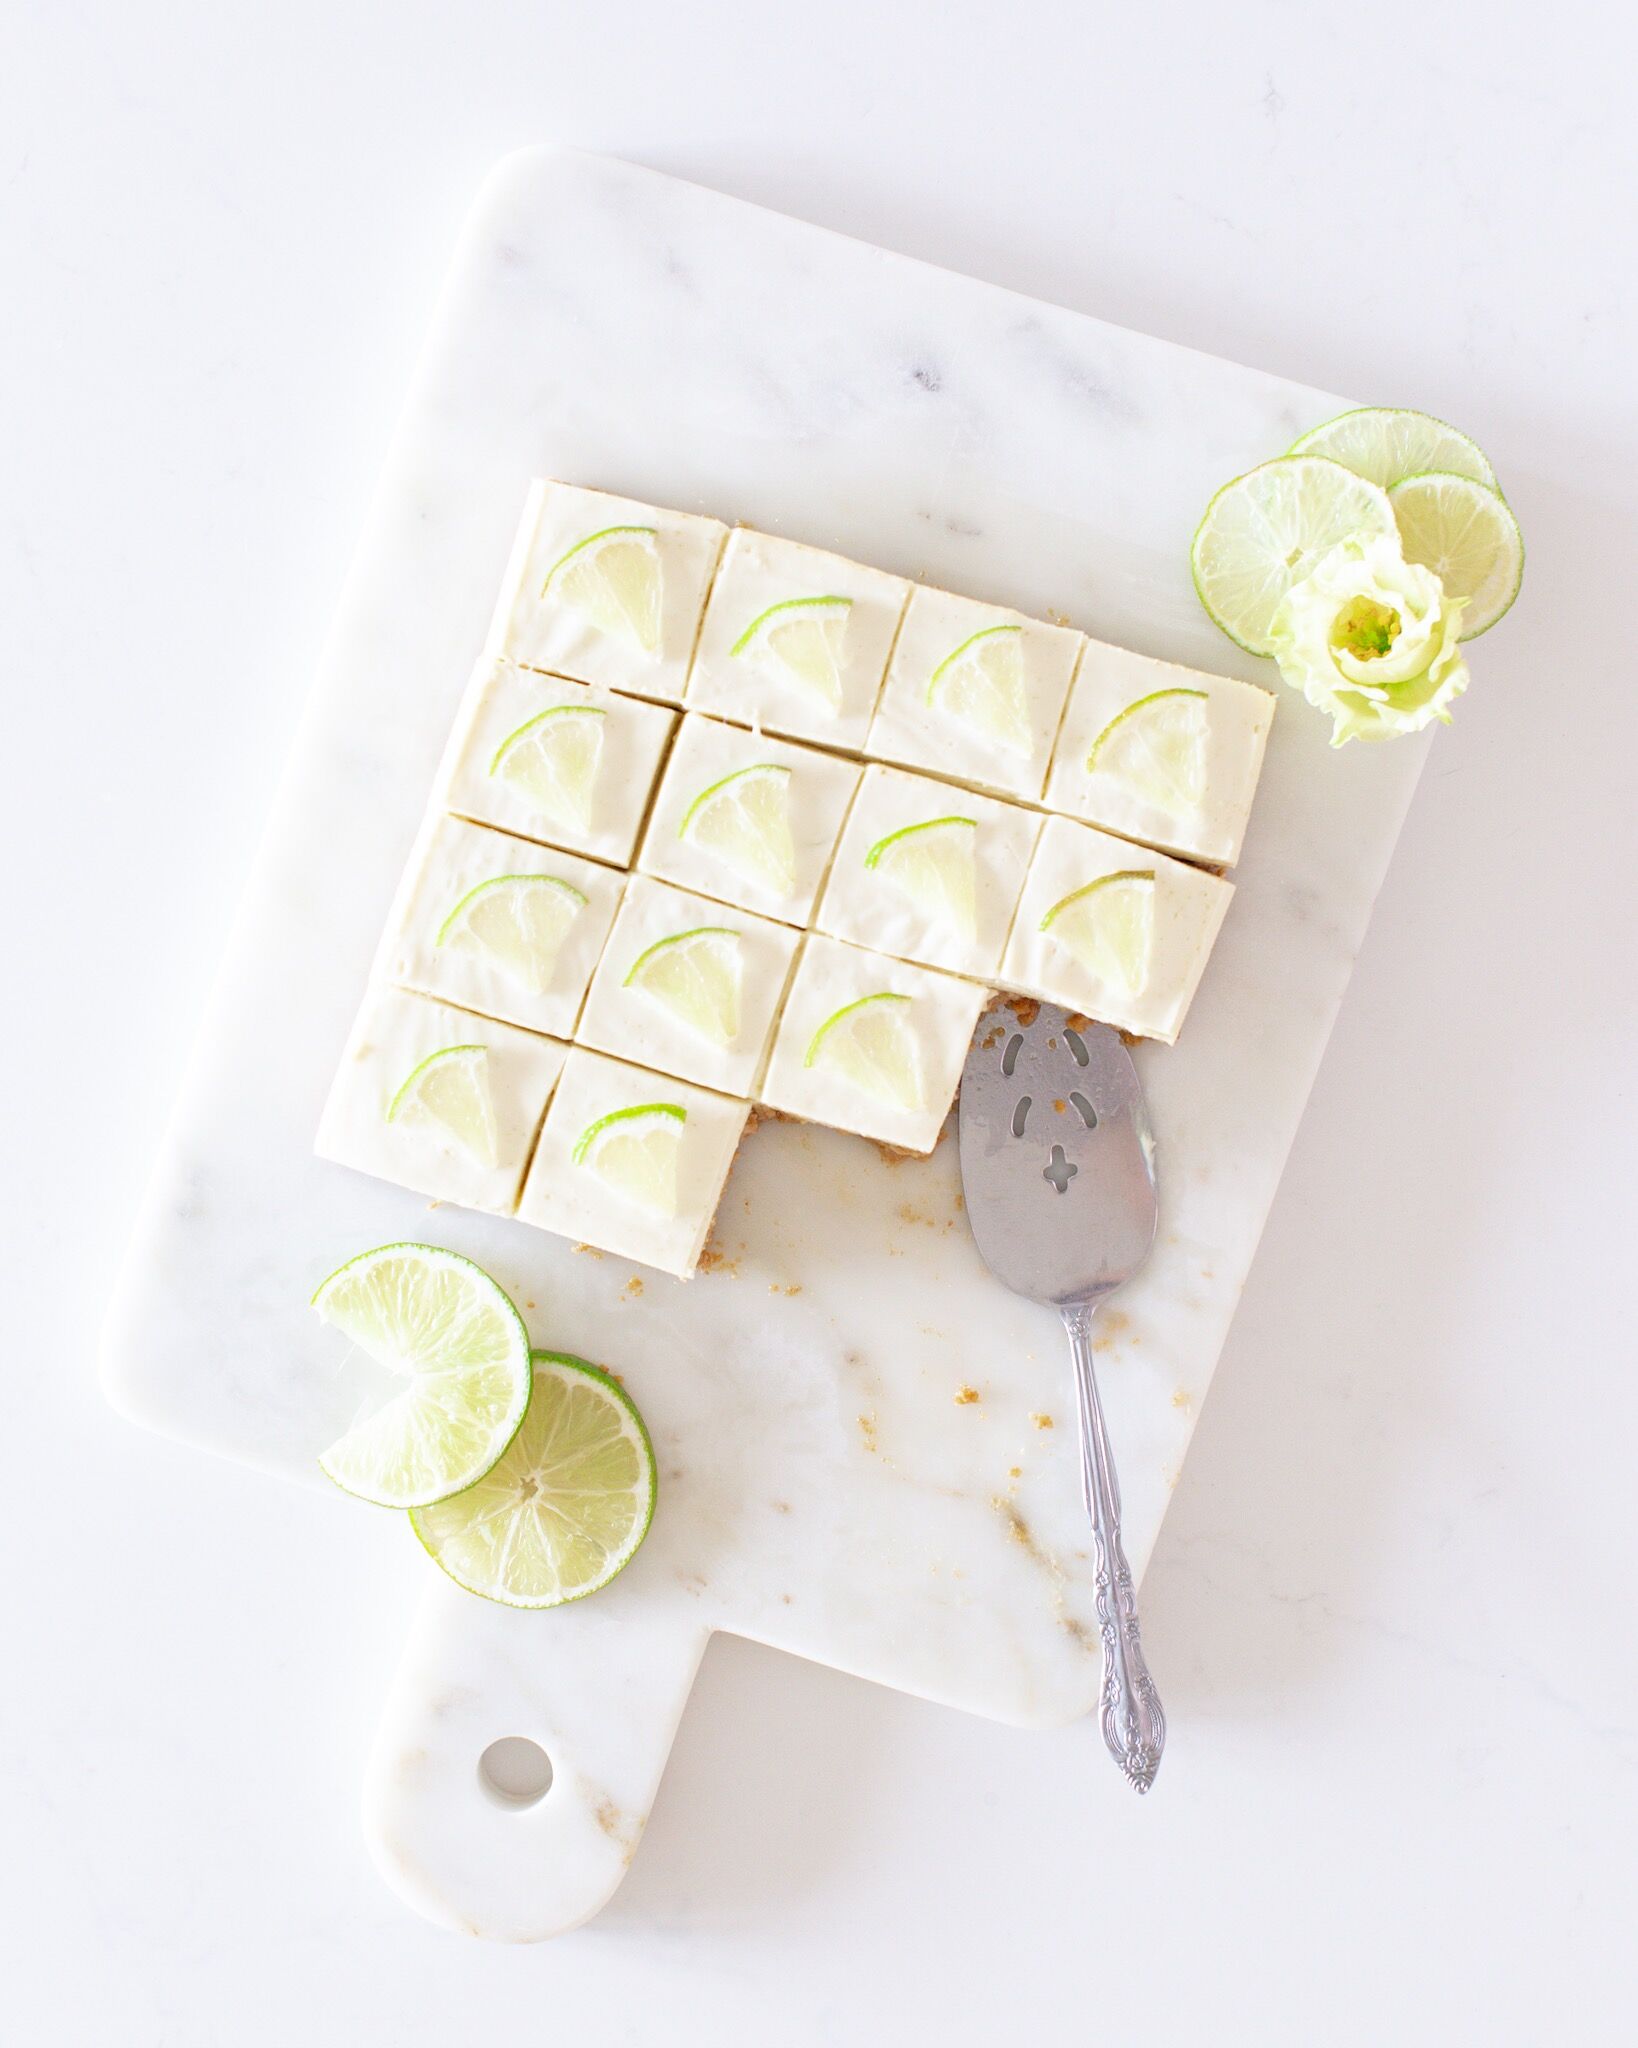 Tequila Lime Cheesecake Bites made with a combination of Greek yogurt and cream cheese for a lighter no-bake version of a traditional cheesecake.